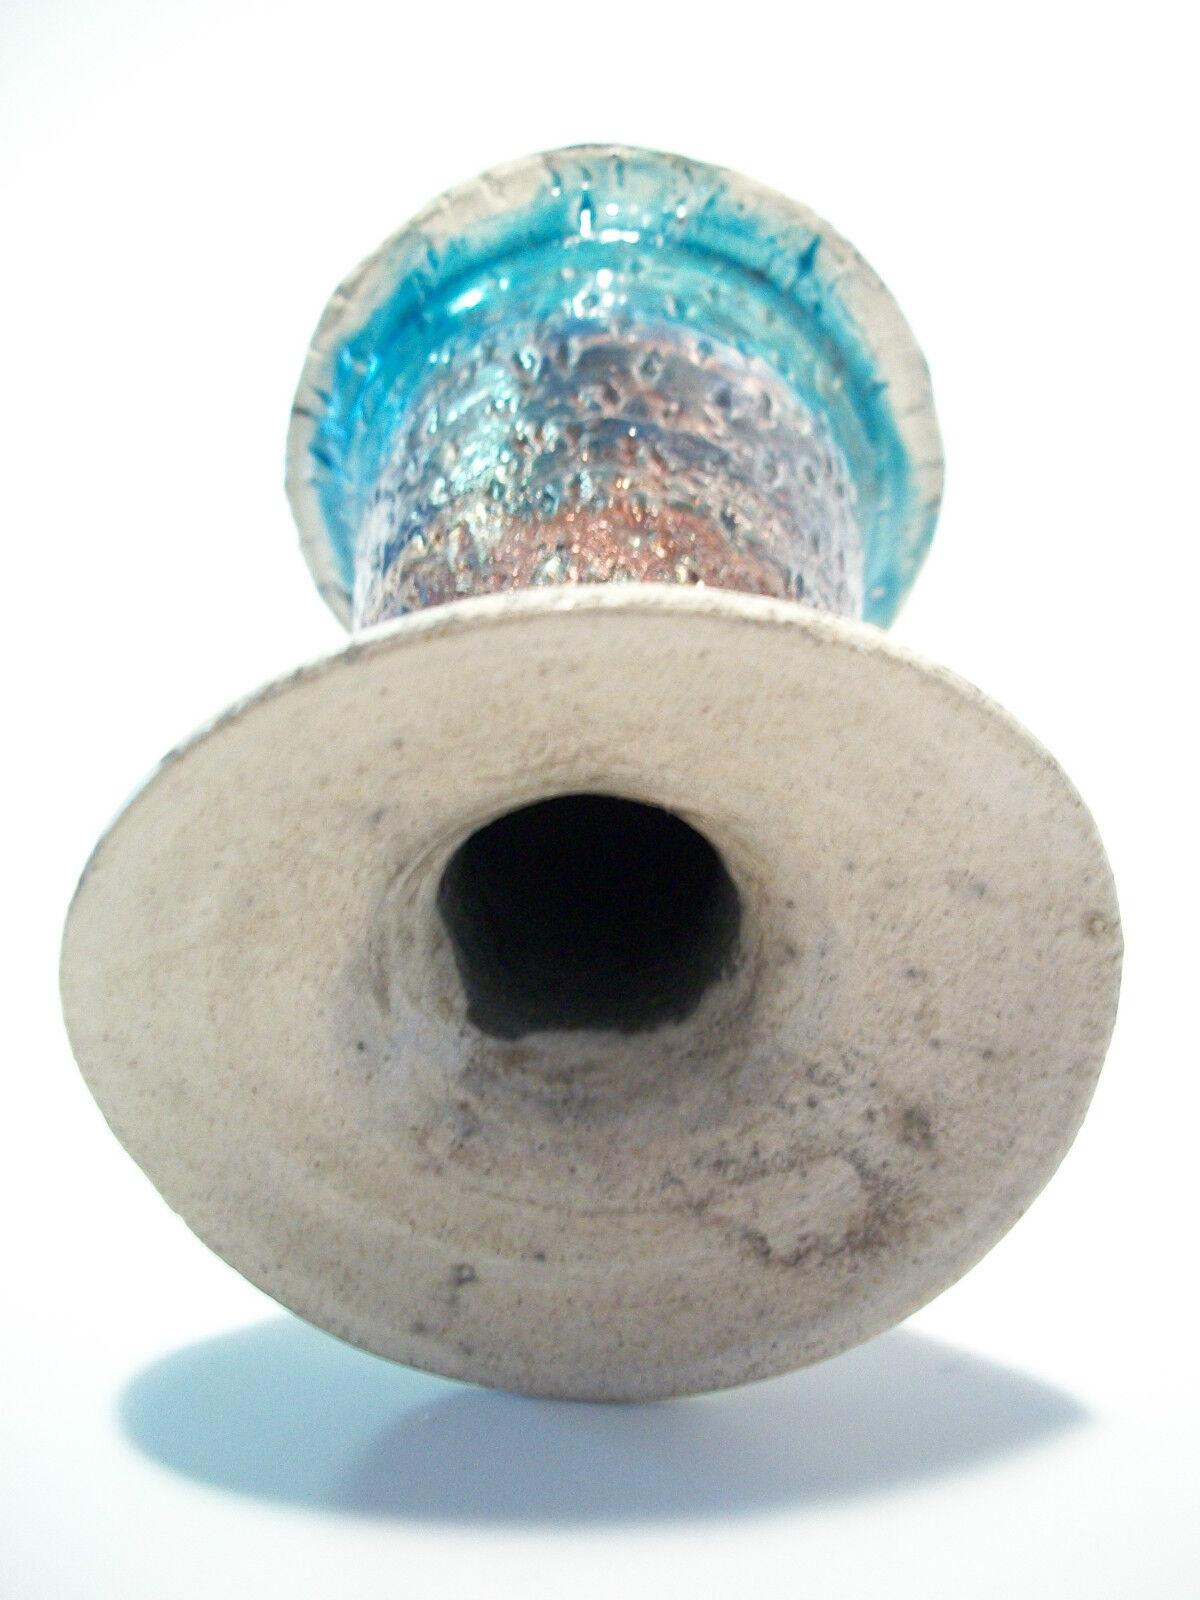 Vintage Raku Studio Pottery Vase - Iridescent Glaze - Signed - Circa 1970's In Good Condition For Sale In Chatham, ON